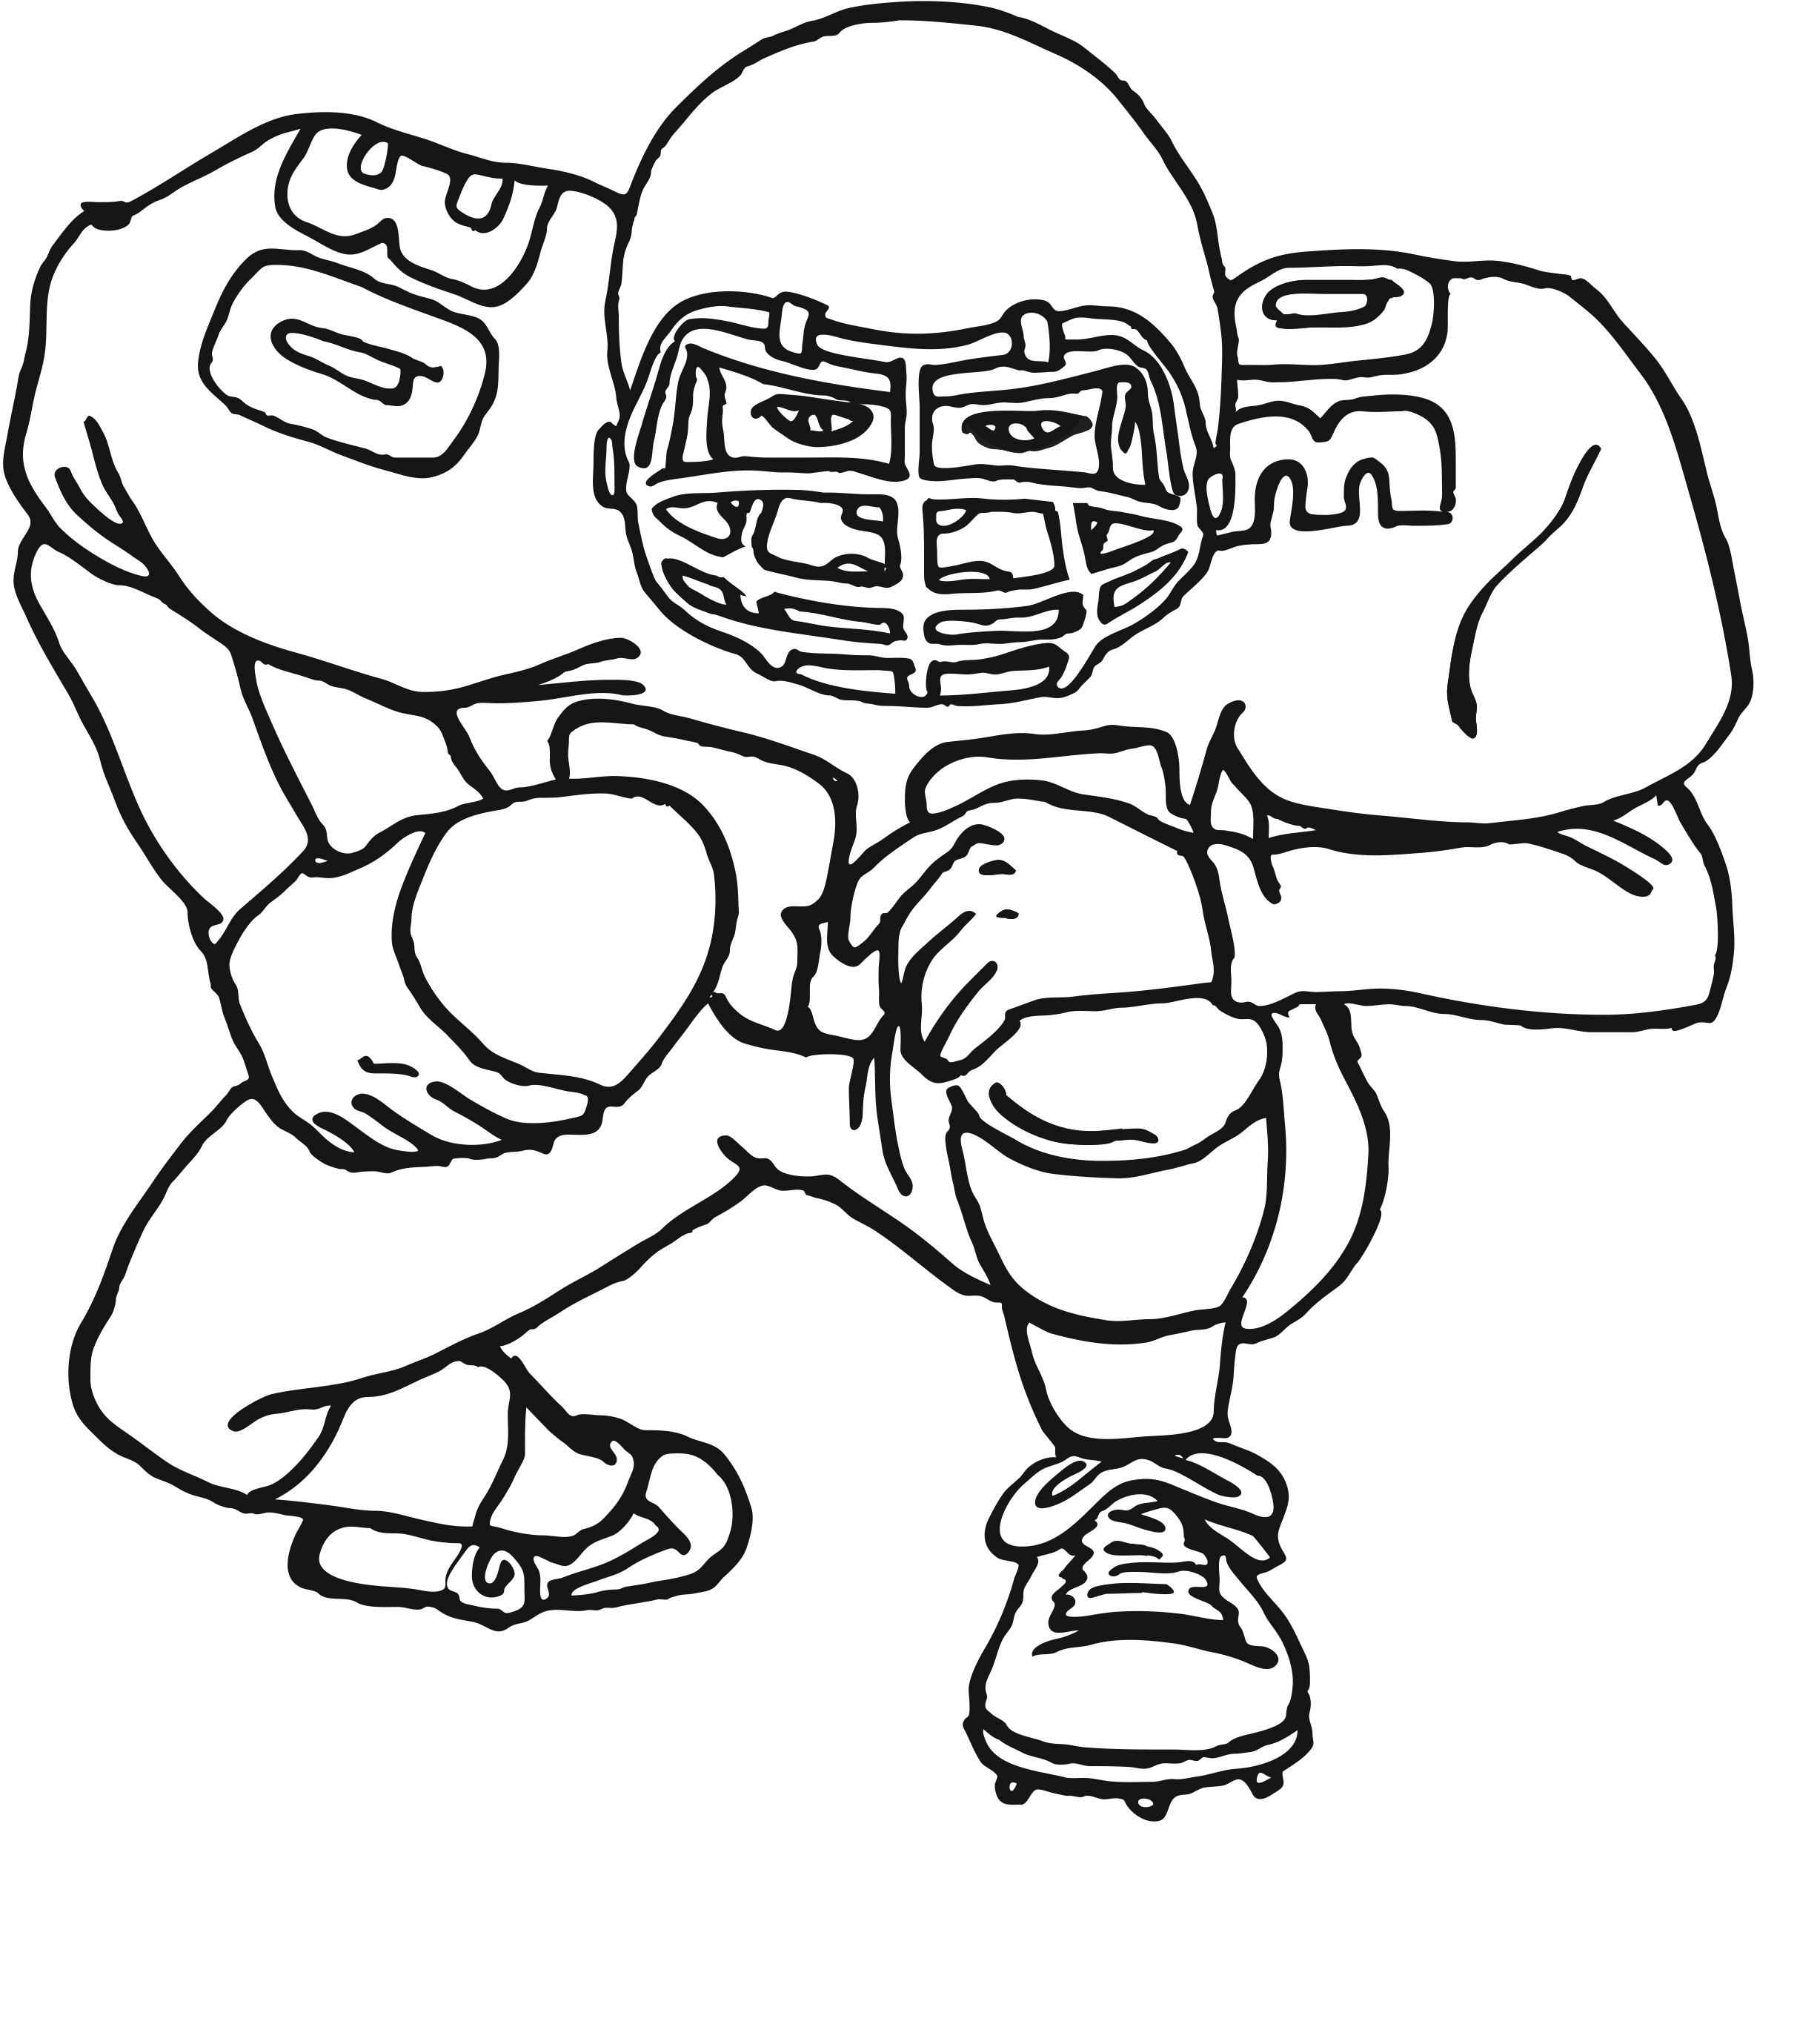 Coloring ~ Football Coloring Sheets Colts Pages Free Stunning Nfl - Free Printable Seahawks Coloring Pages